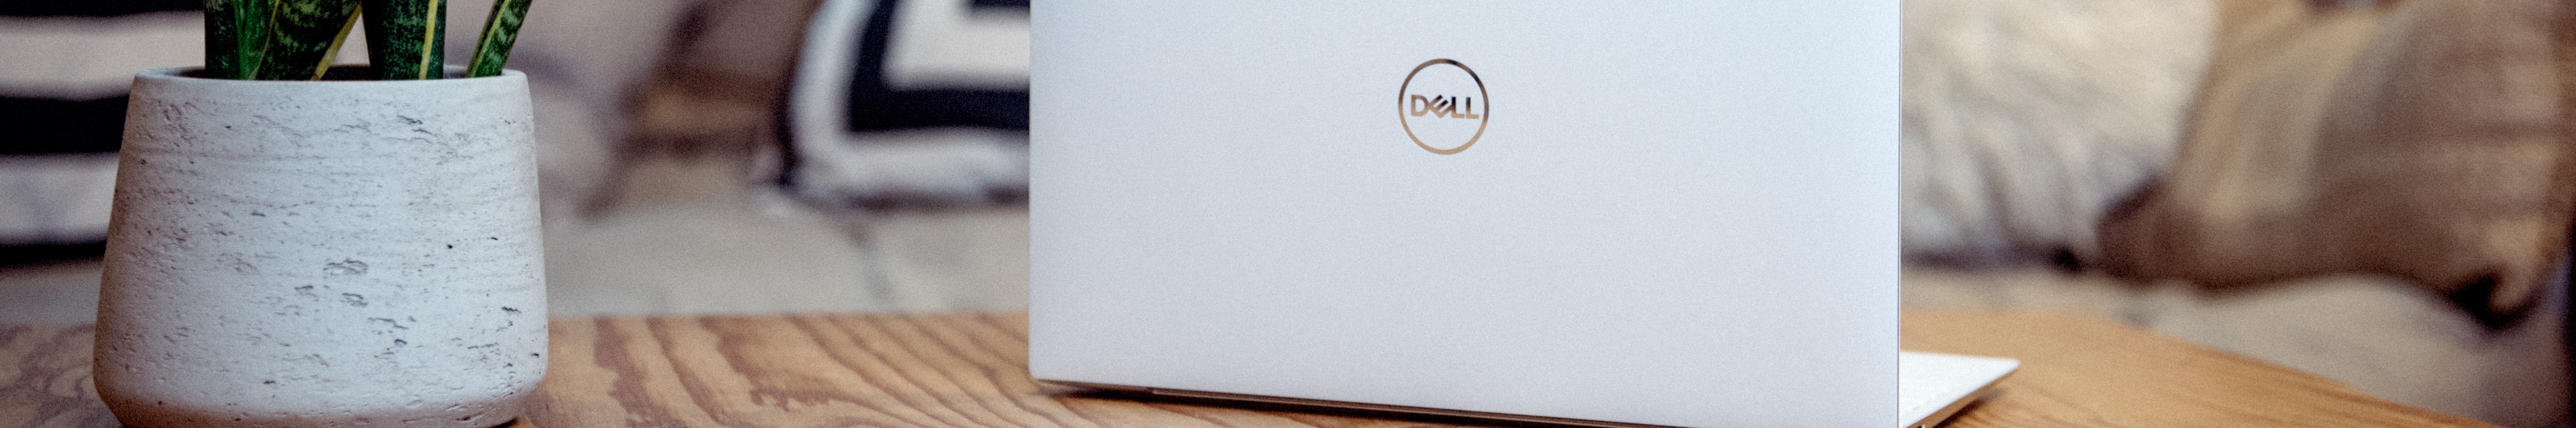 With its PCs, Dell is making millions of people across the globe more productive and efficient